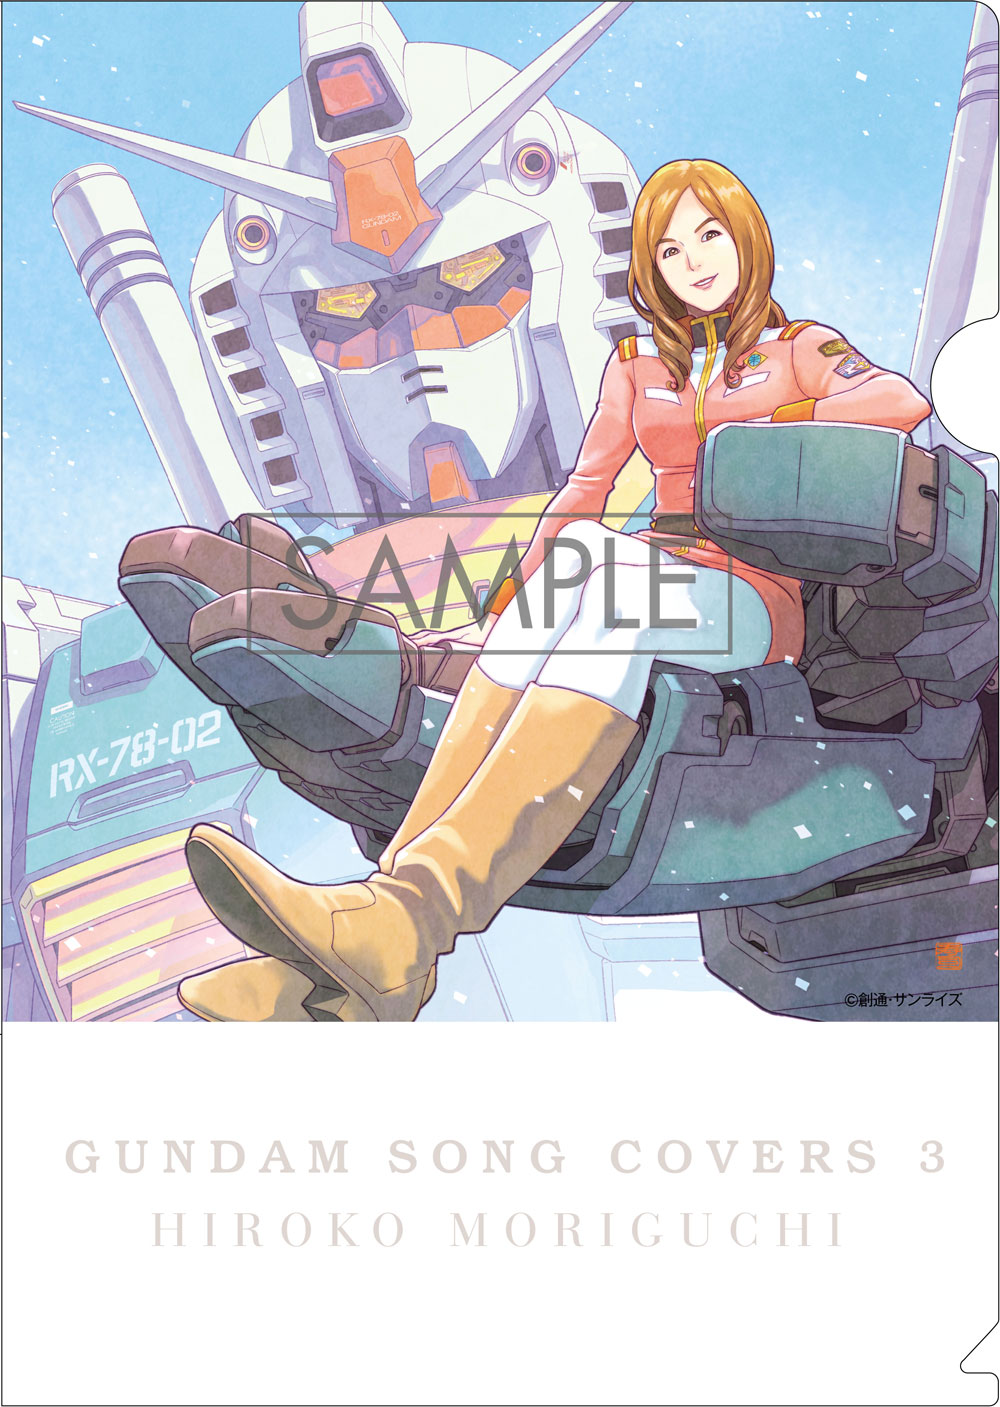 「GUNDAM SONG COVERS 3」A4サイズクリアファイル